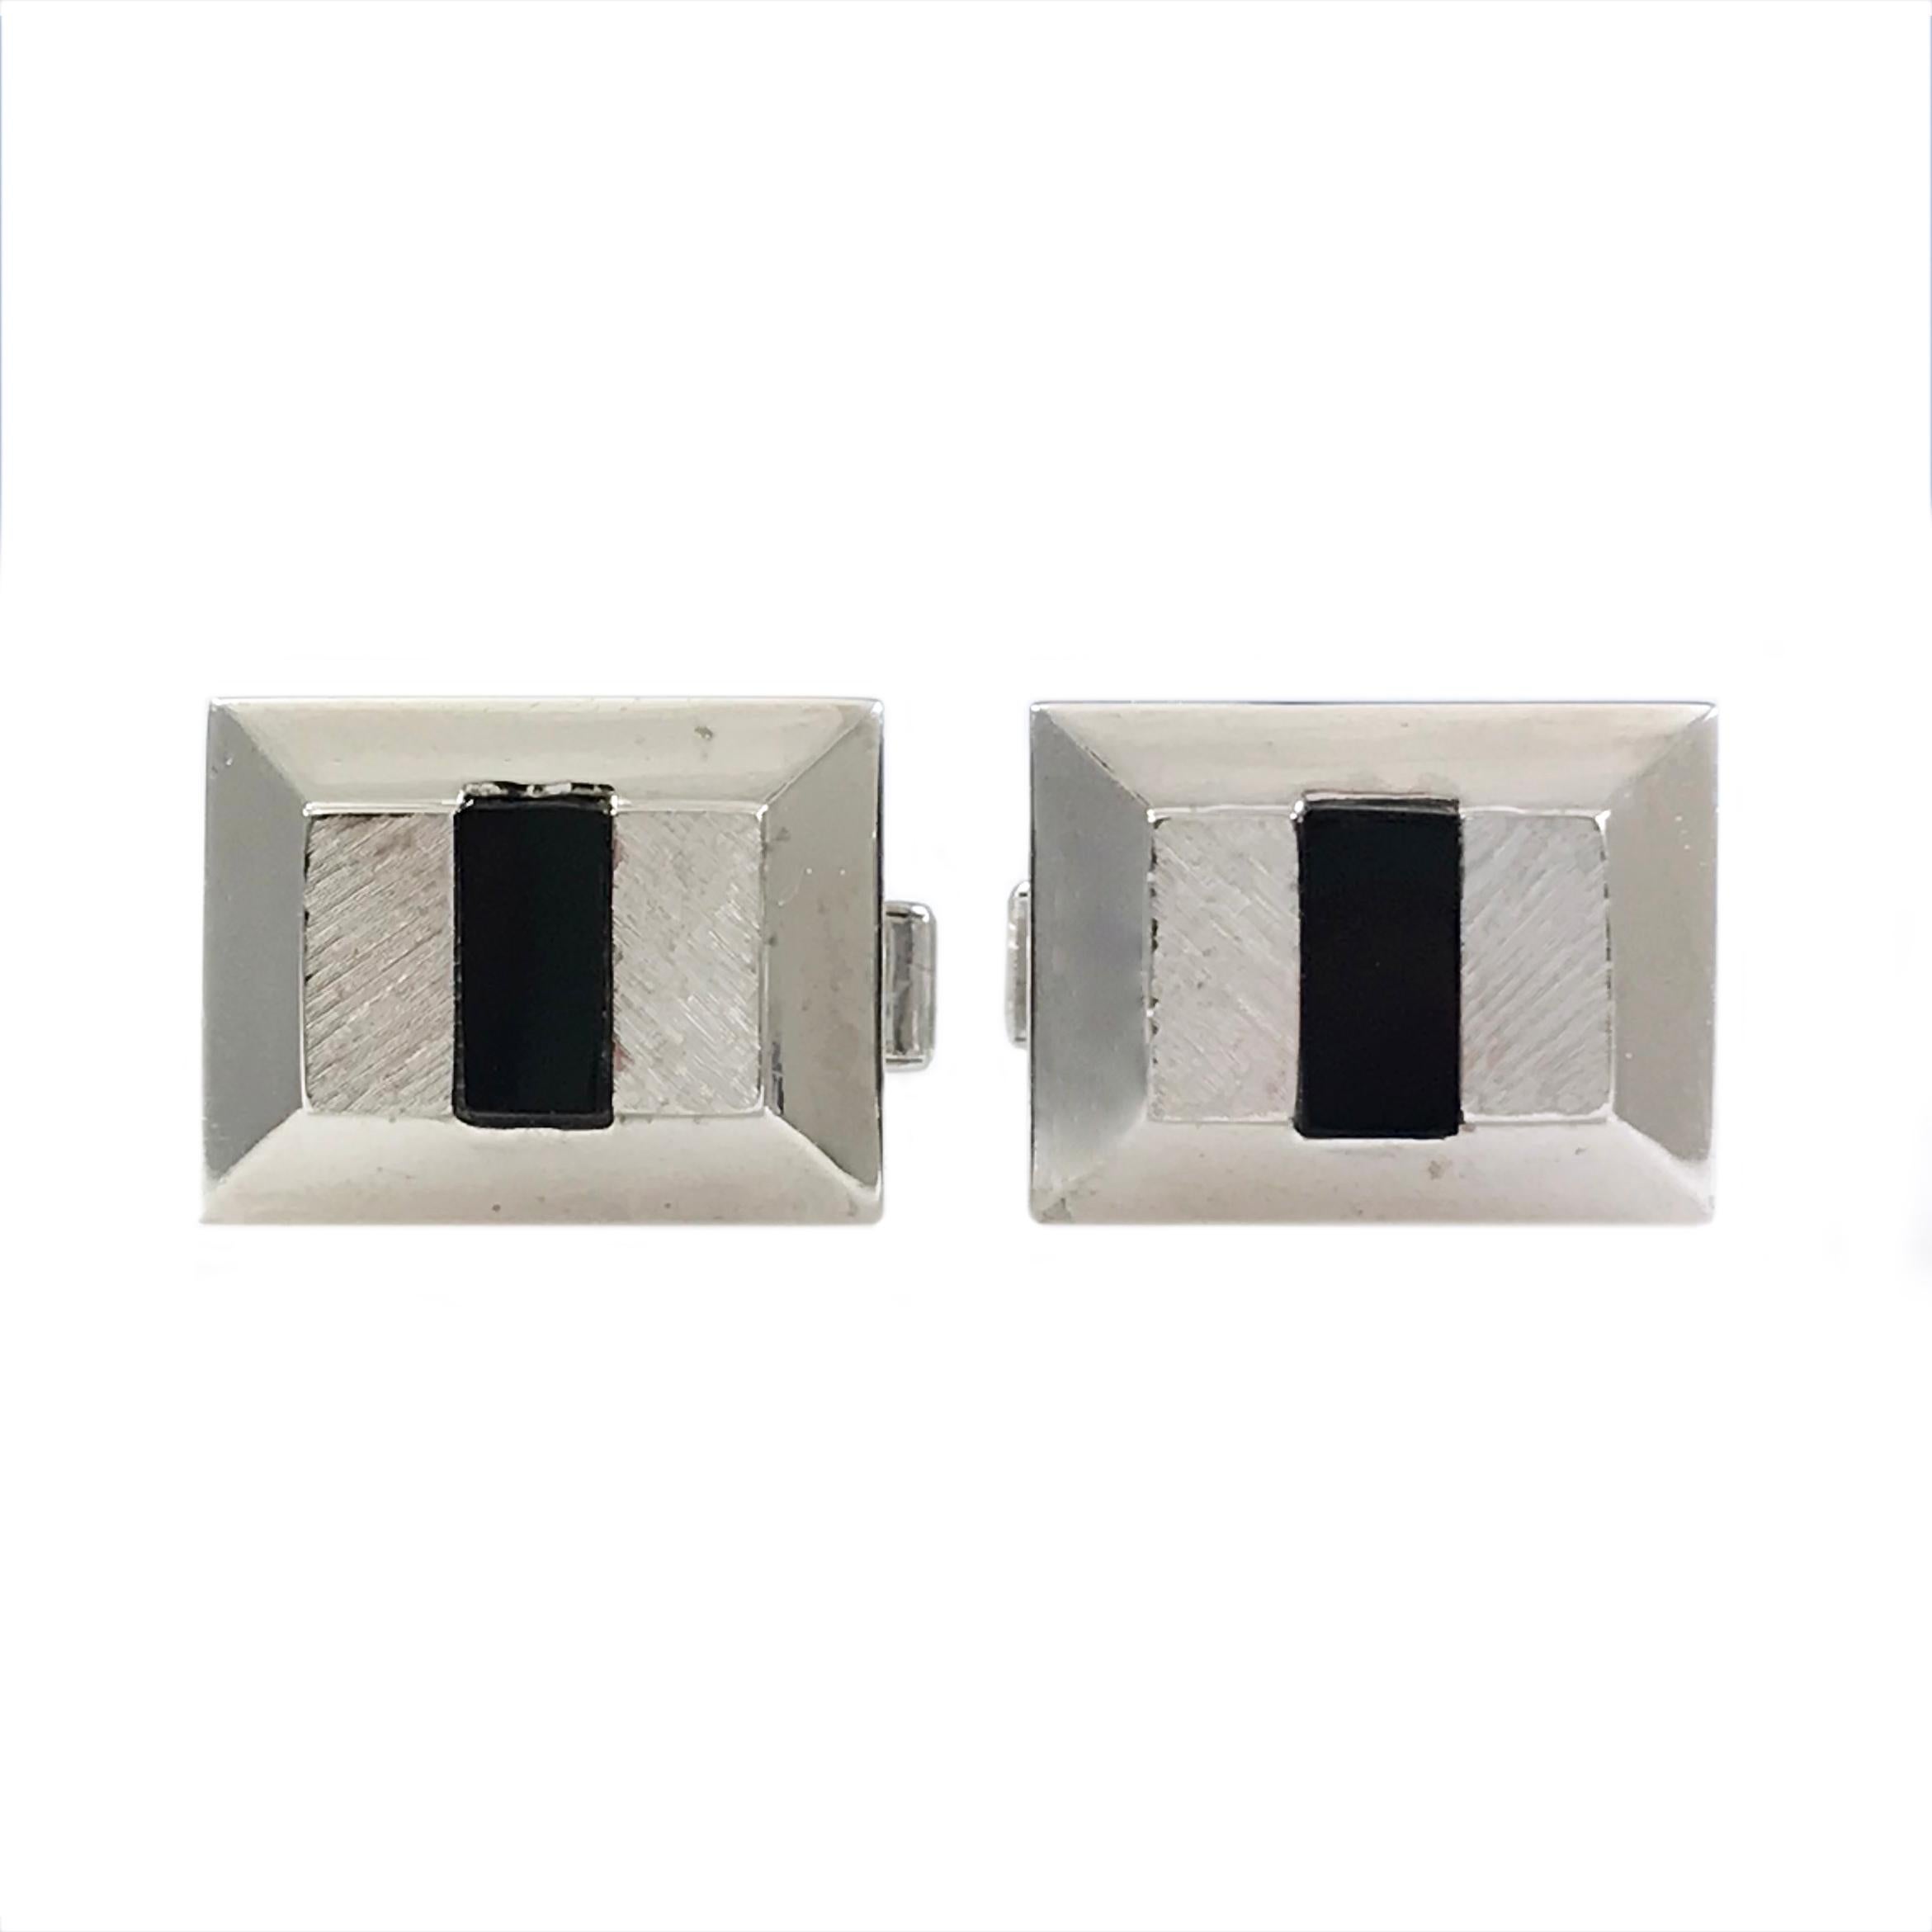 Rectangular Onyx White Gold Cufflinks. The cufflink fronts are a truncated pyramid with a rectangular Onyx flush set in the center, the opposite sides are angle satin finished and the rest of the cufflinks are high polish finished. The cufflinks